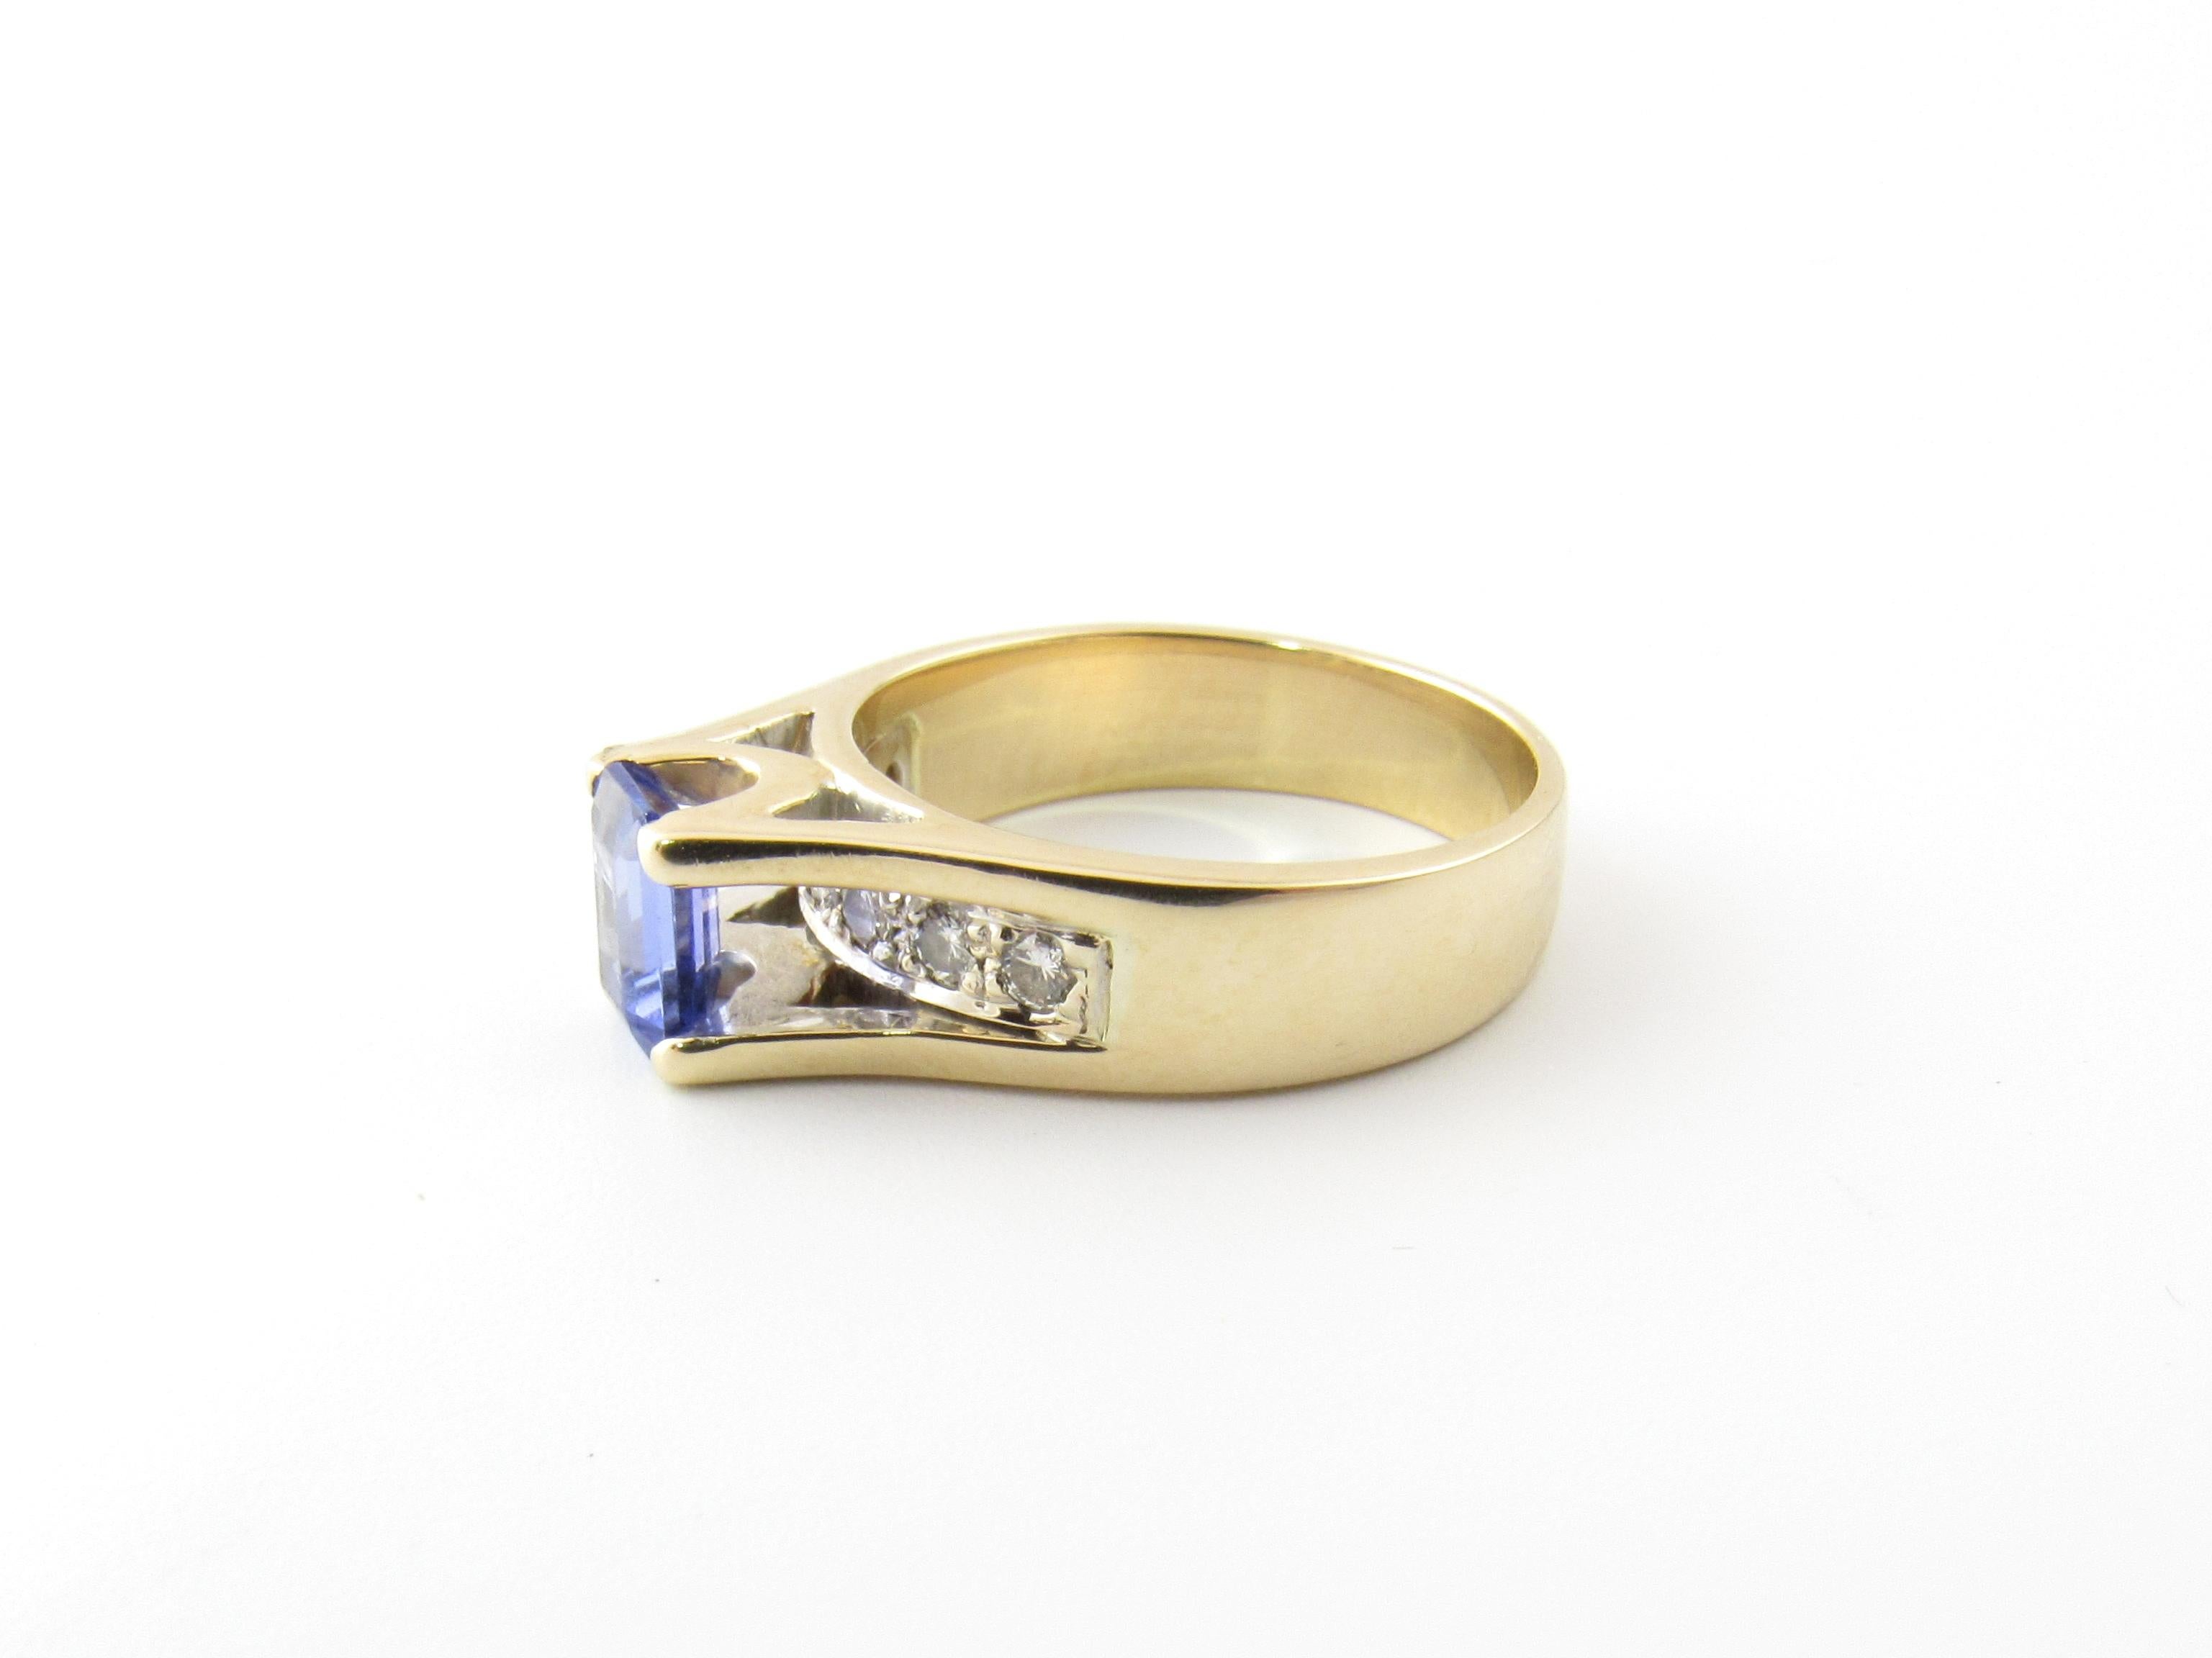 14 Karat Yellow Gold Tanzanite and Diamond Ring Size 6.75-

This stunning ring features one tanzanite (7 mm x 6 mm) and seven round brilliant cut diamonds (.05 ct. each) set in beautifully detailed 14K yellow gold.  Height:  8 mm.  Width:  7 mm. 